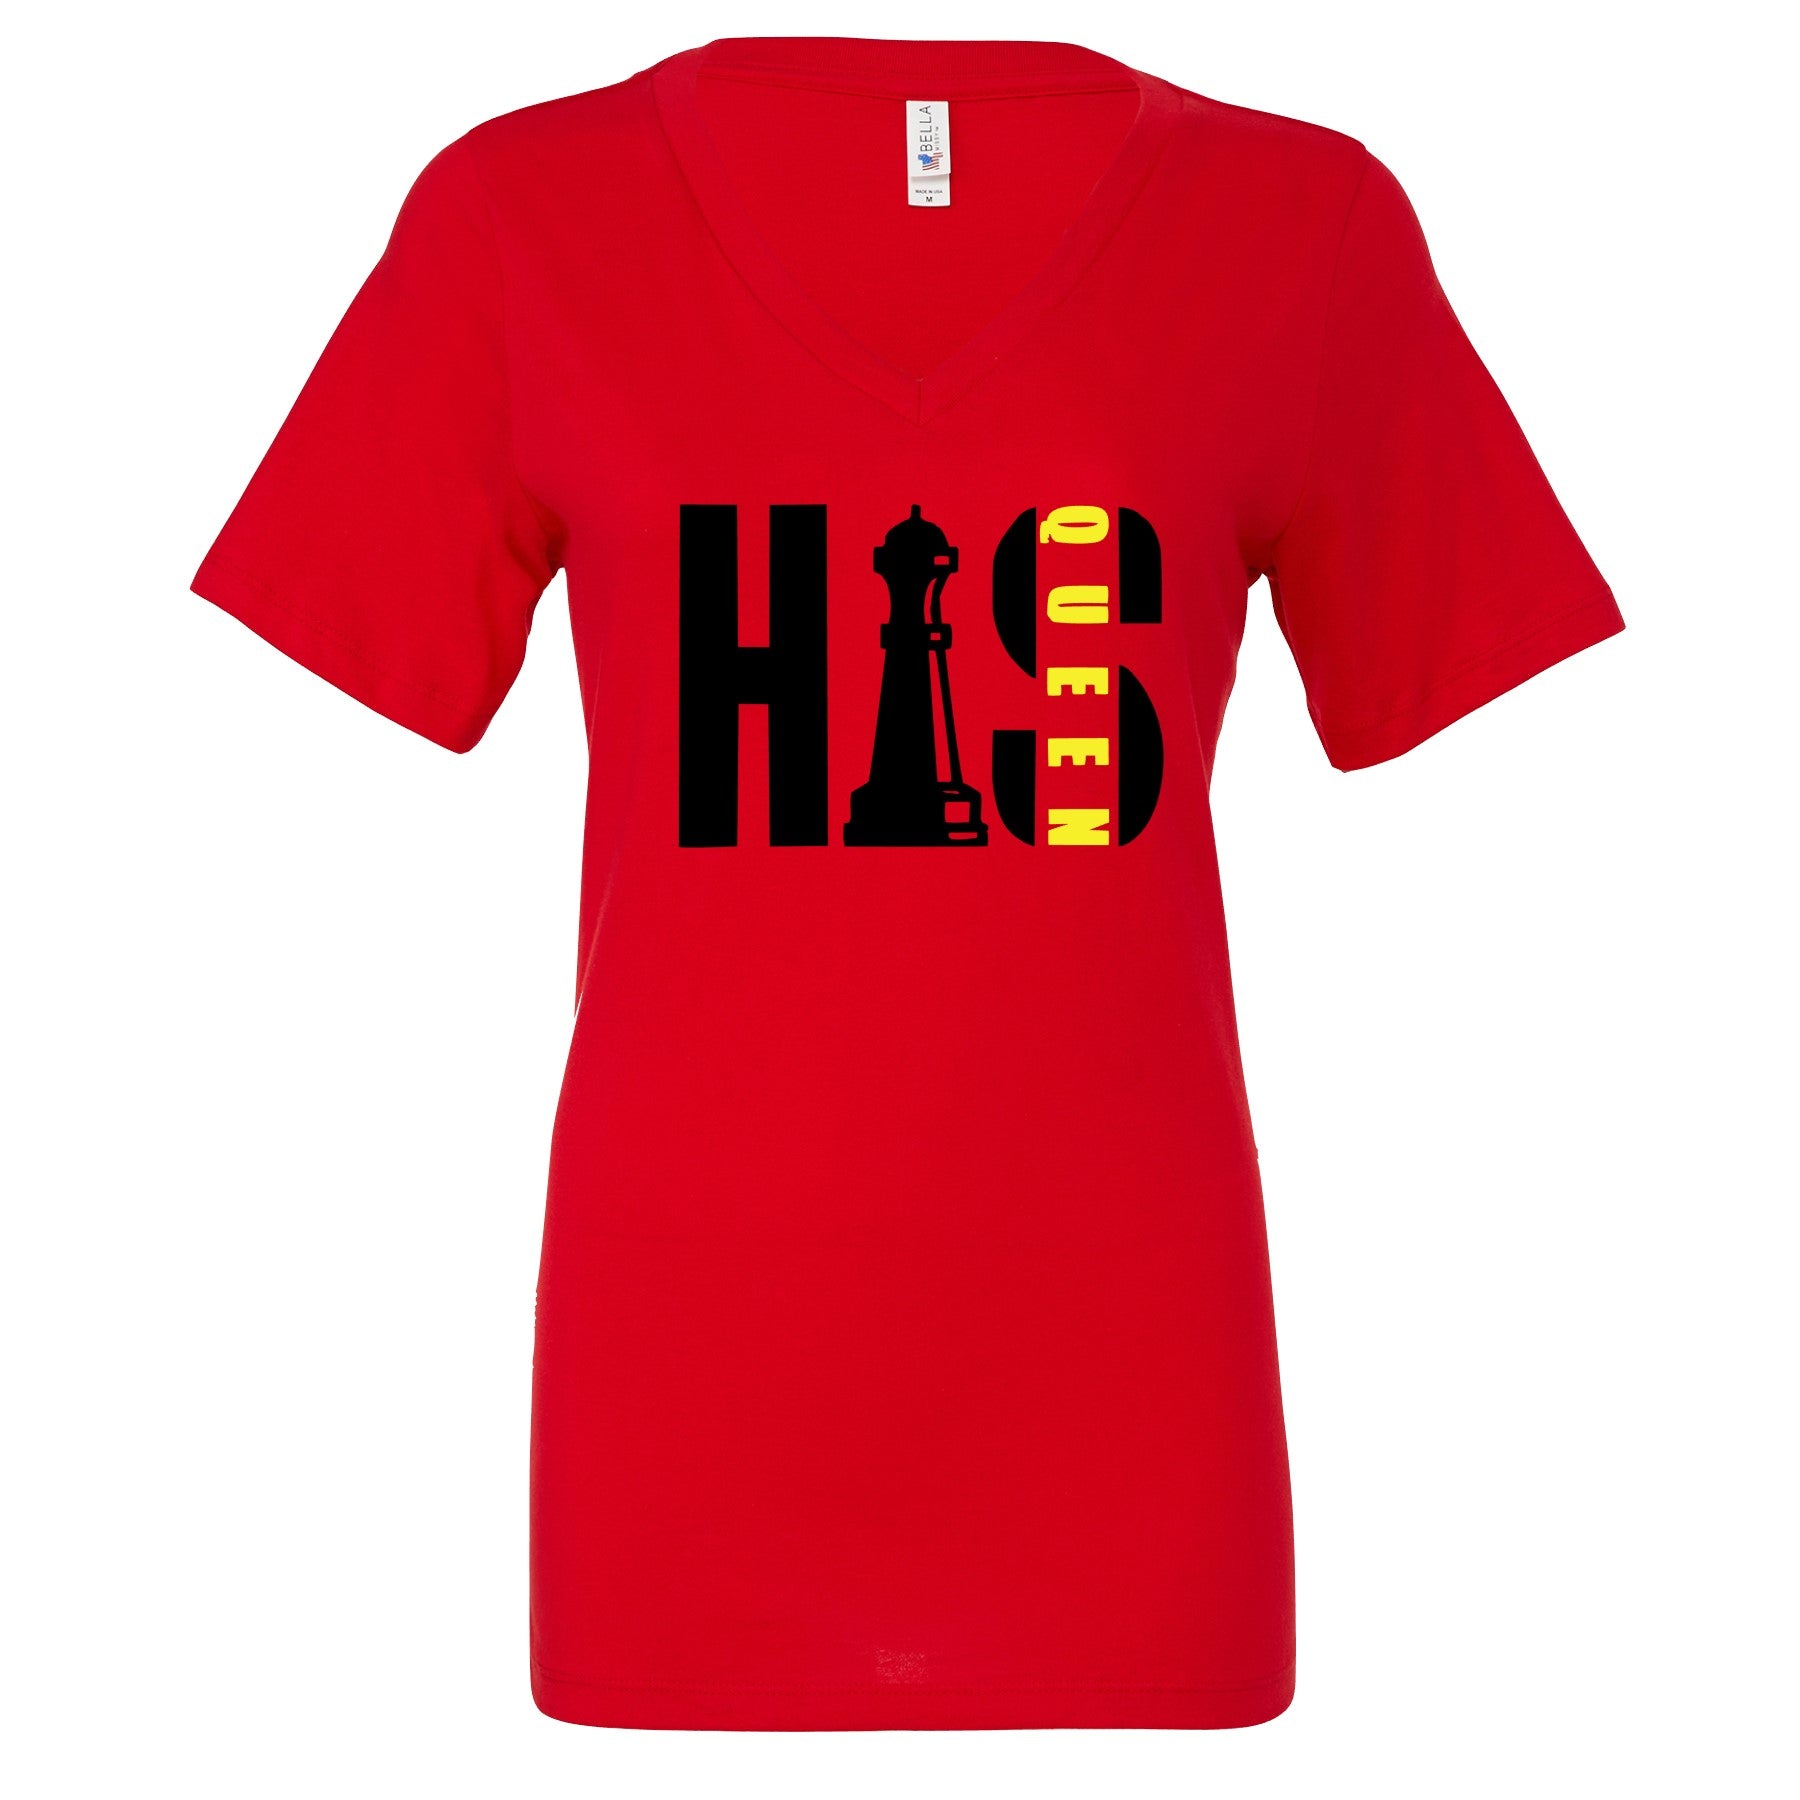 Profyle District - His Queen - T-Shirts - Red